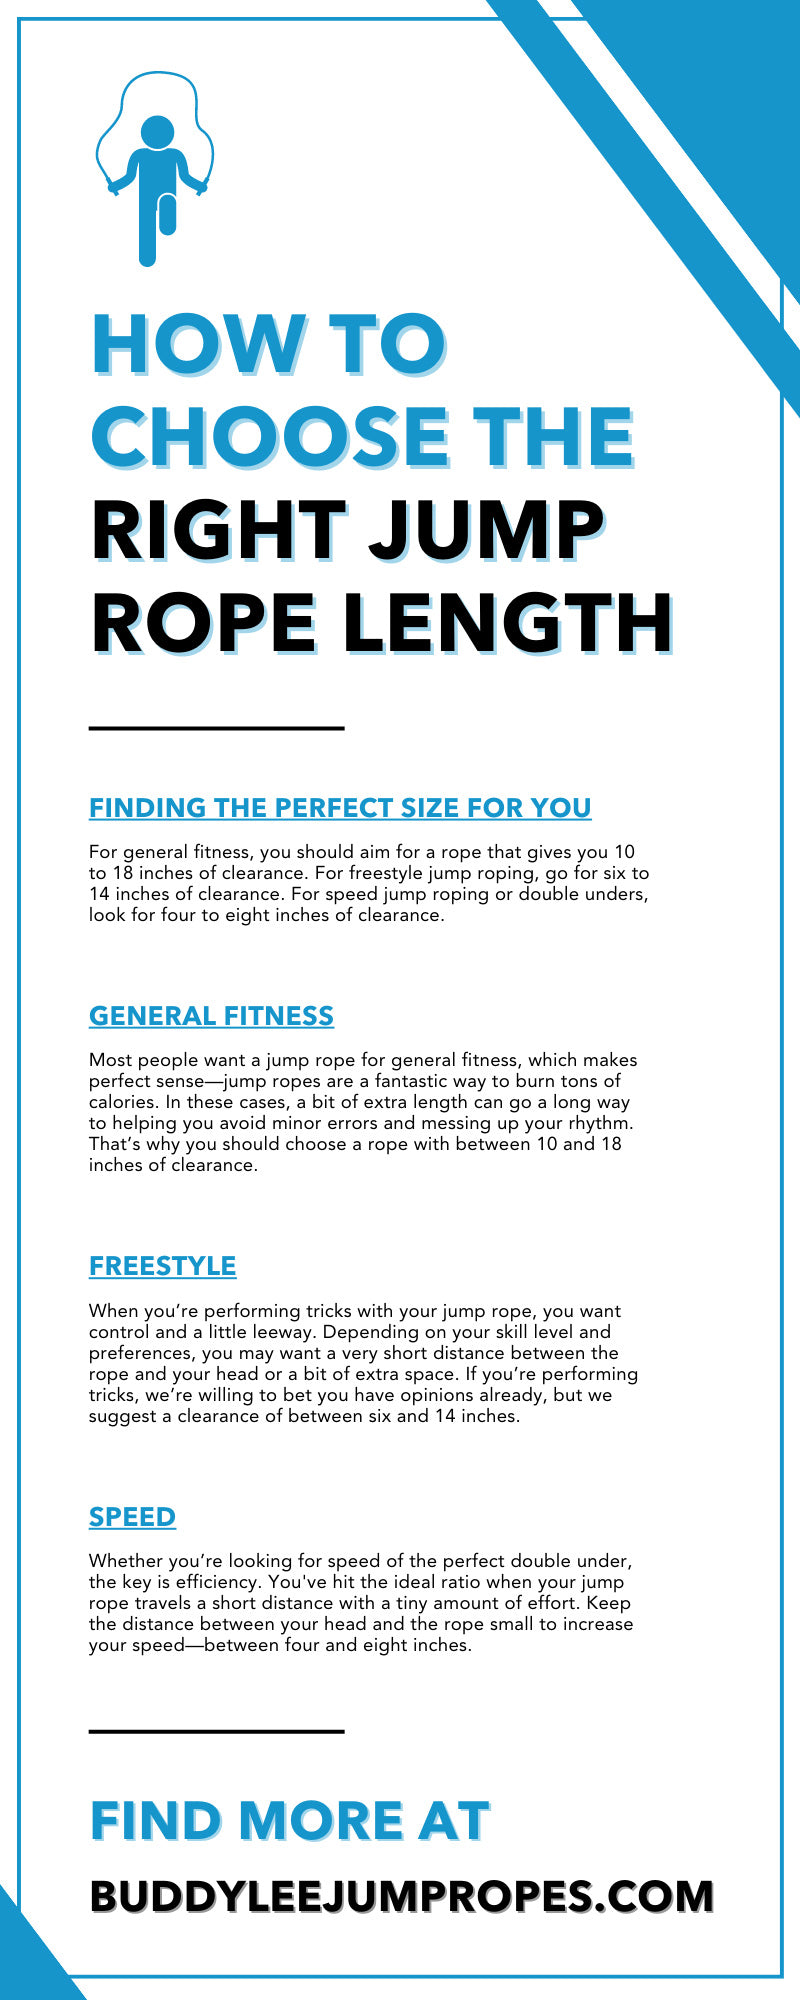 How To Choose the Right Jump Rope Length – Buddy Lee Jump Ropes